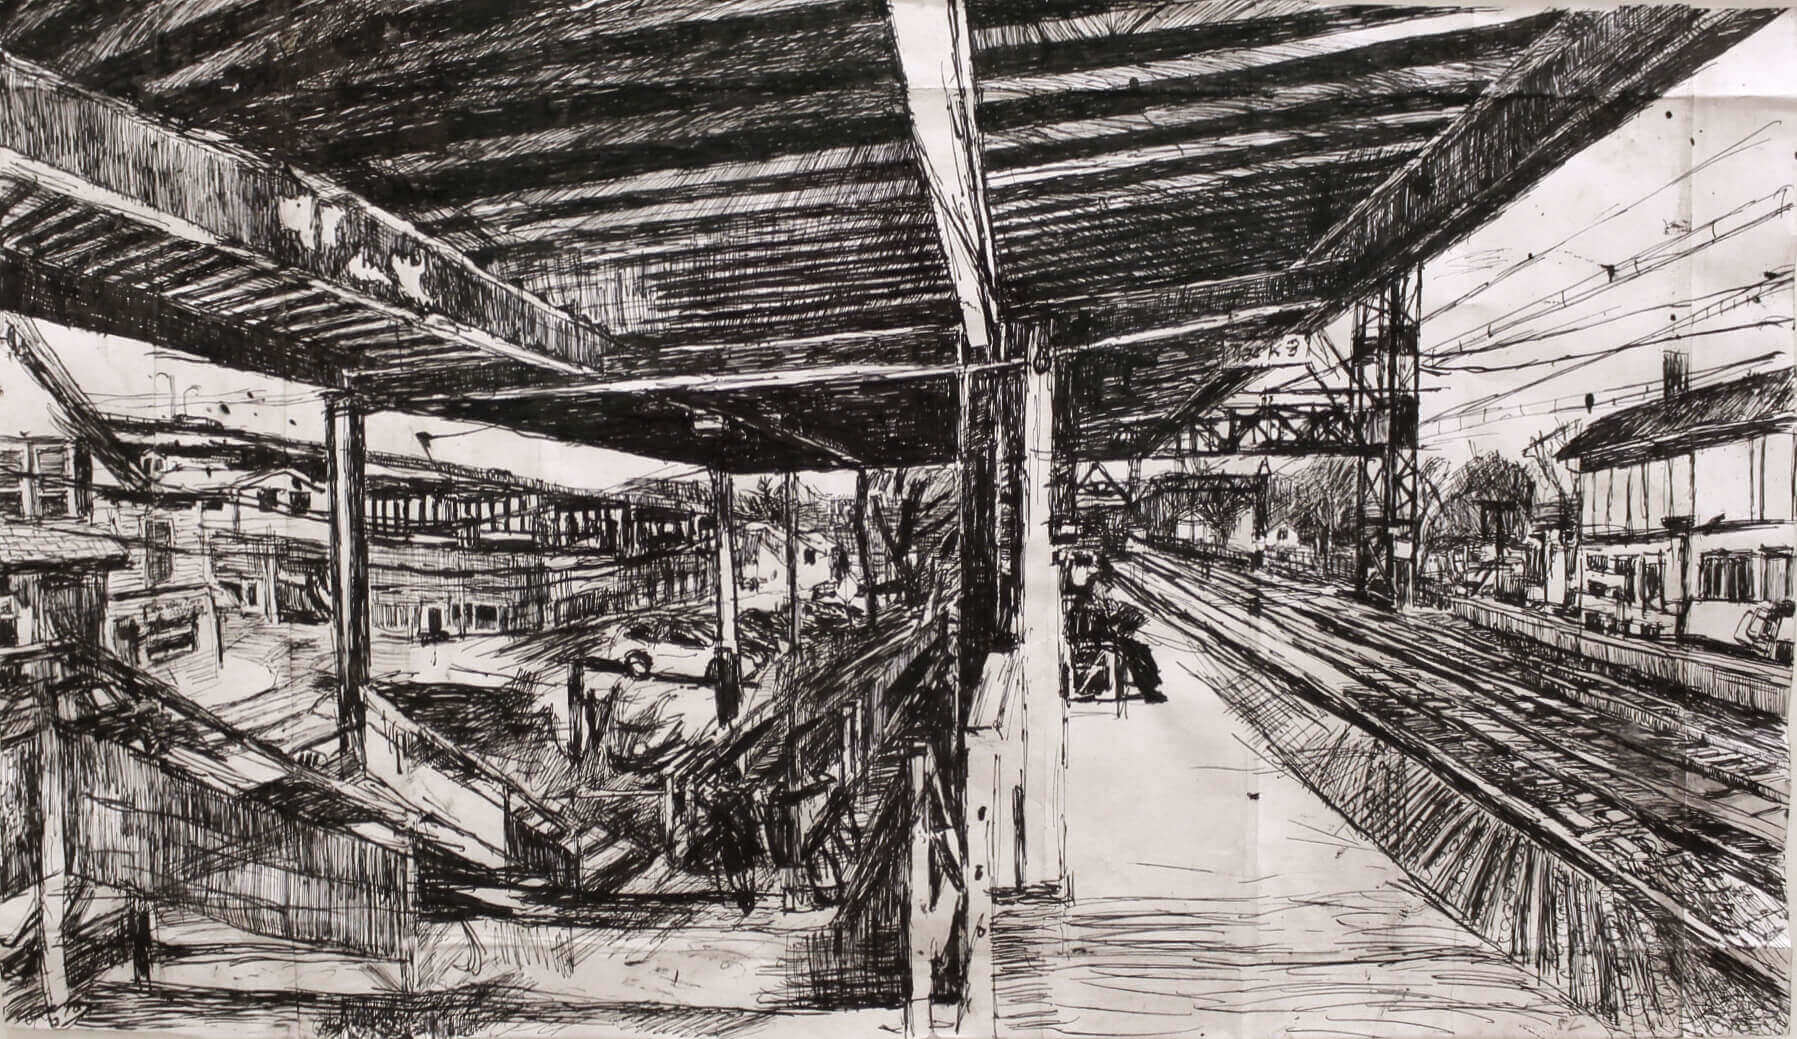 Stanley Lewis, Westport Station with Figures, 2009, ink on paper, 13 x 23 inches (From the Louis-Dreyfus Family Collection, courtesy of The William Louis-Dreyfus Foundation Inc.)